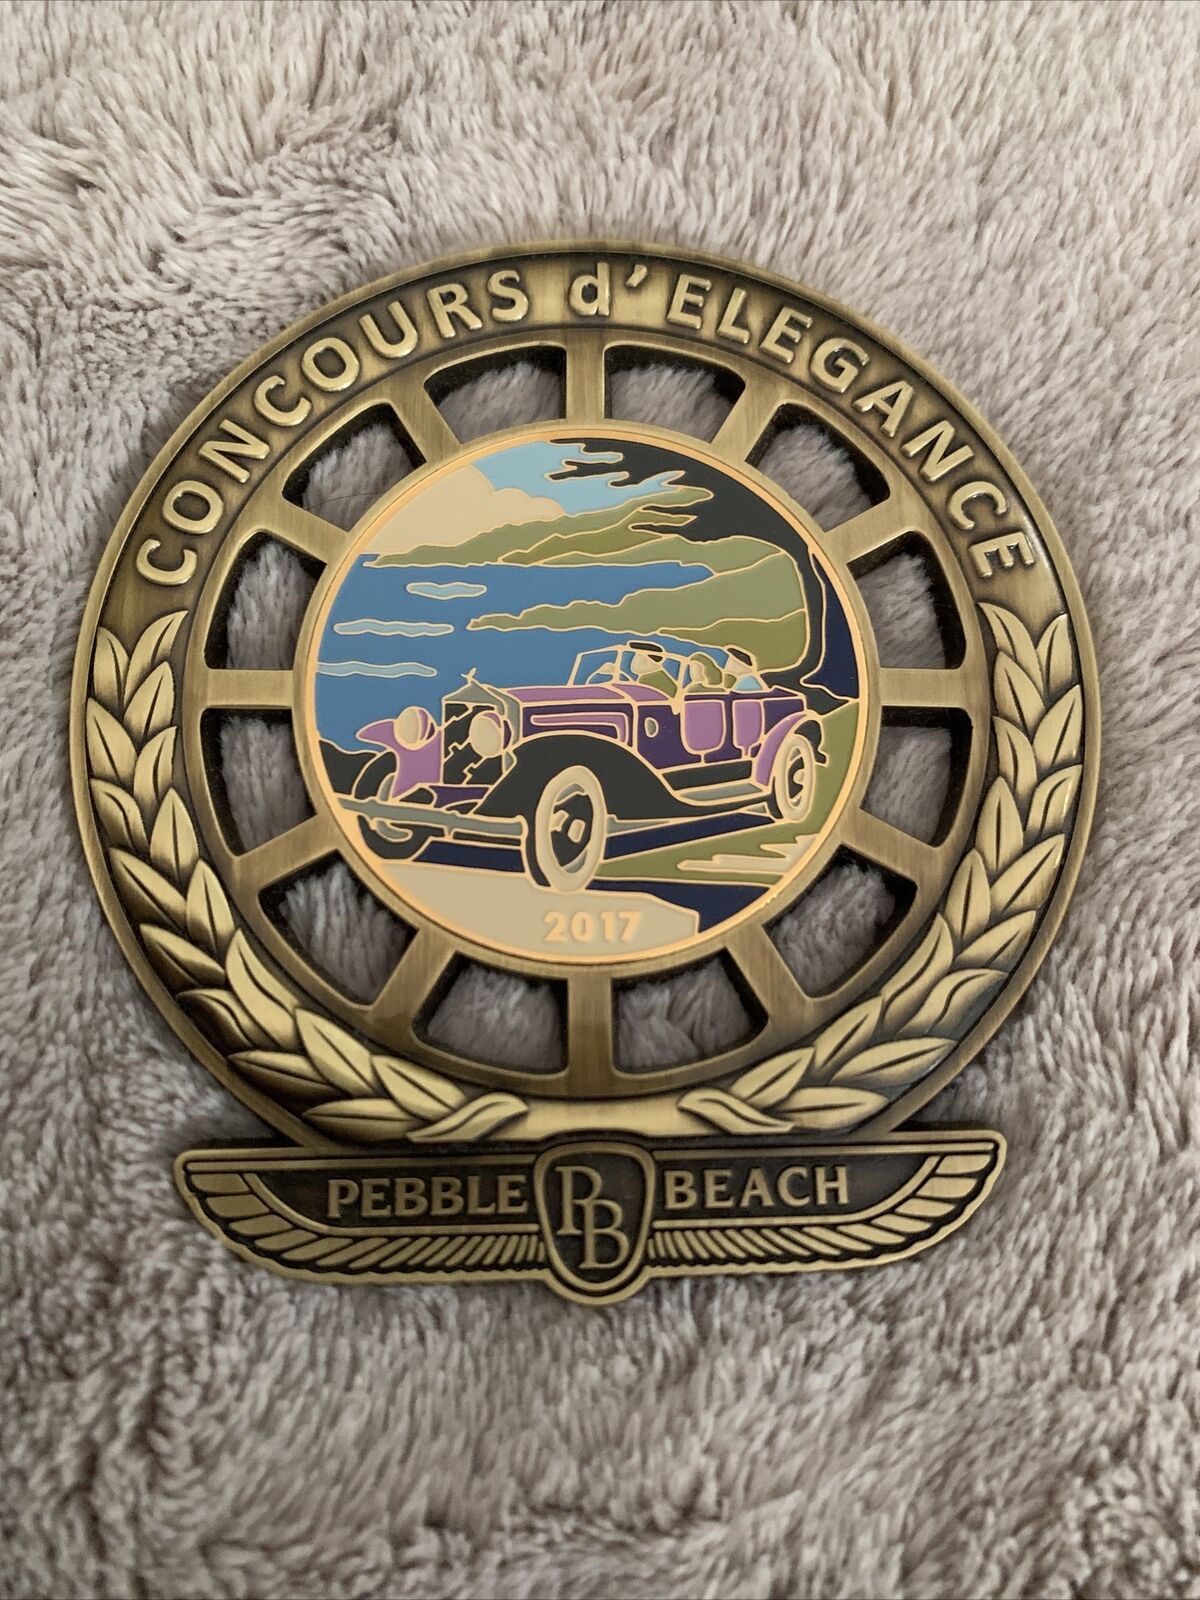 2017 Pebble Beach Concours d'Elegance ISOTTA FRASCHINI Grille Badge